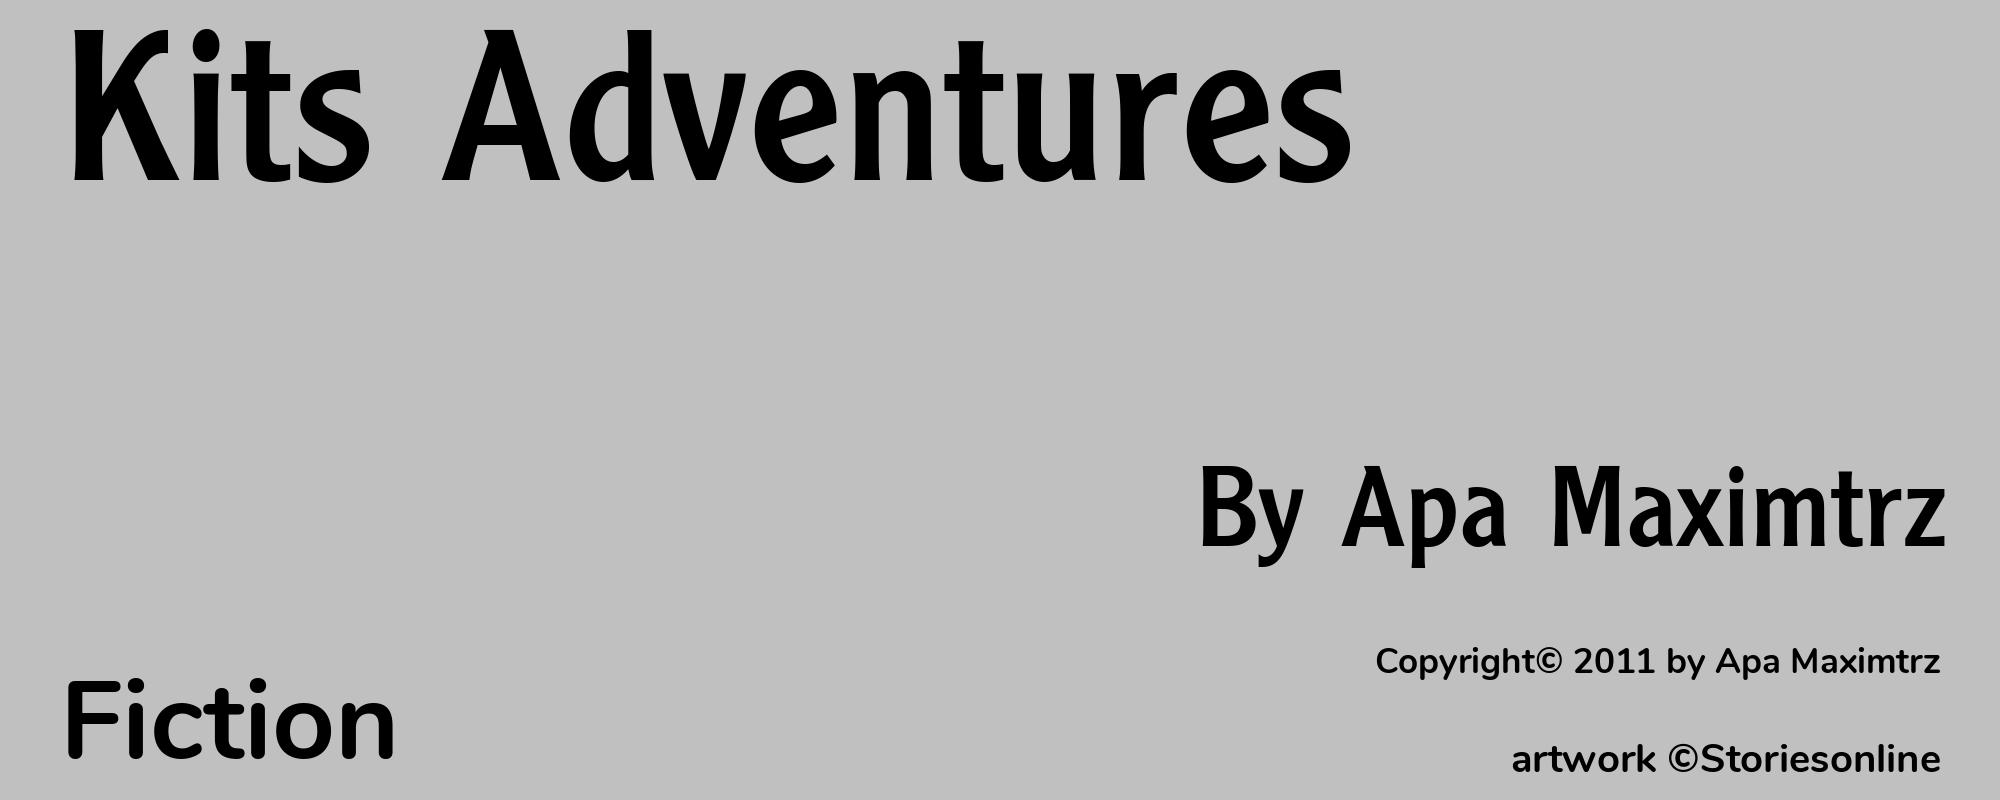 Kits Adventures - Cover